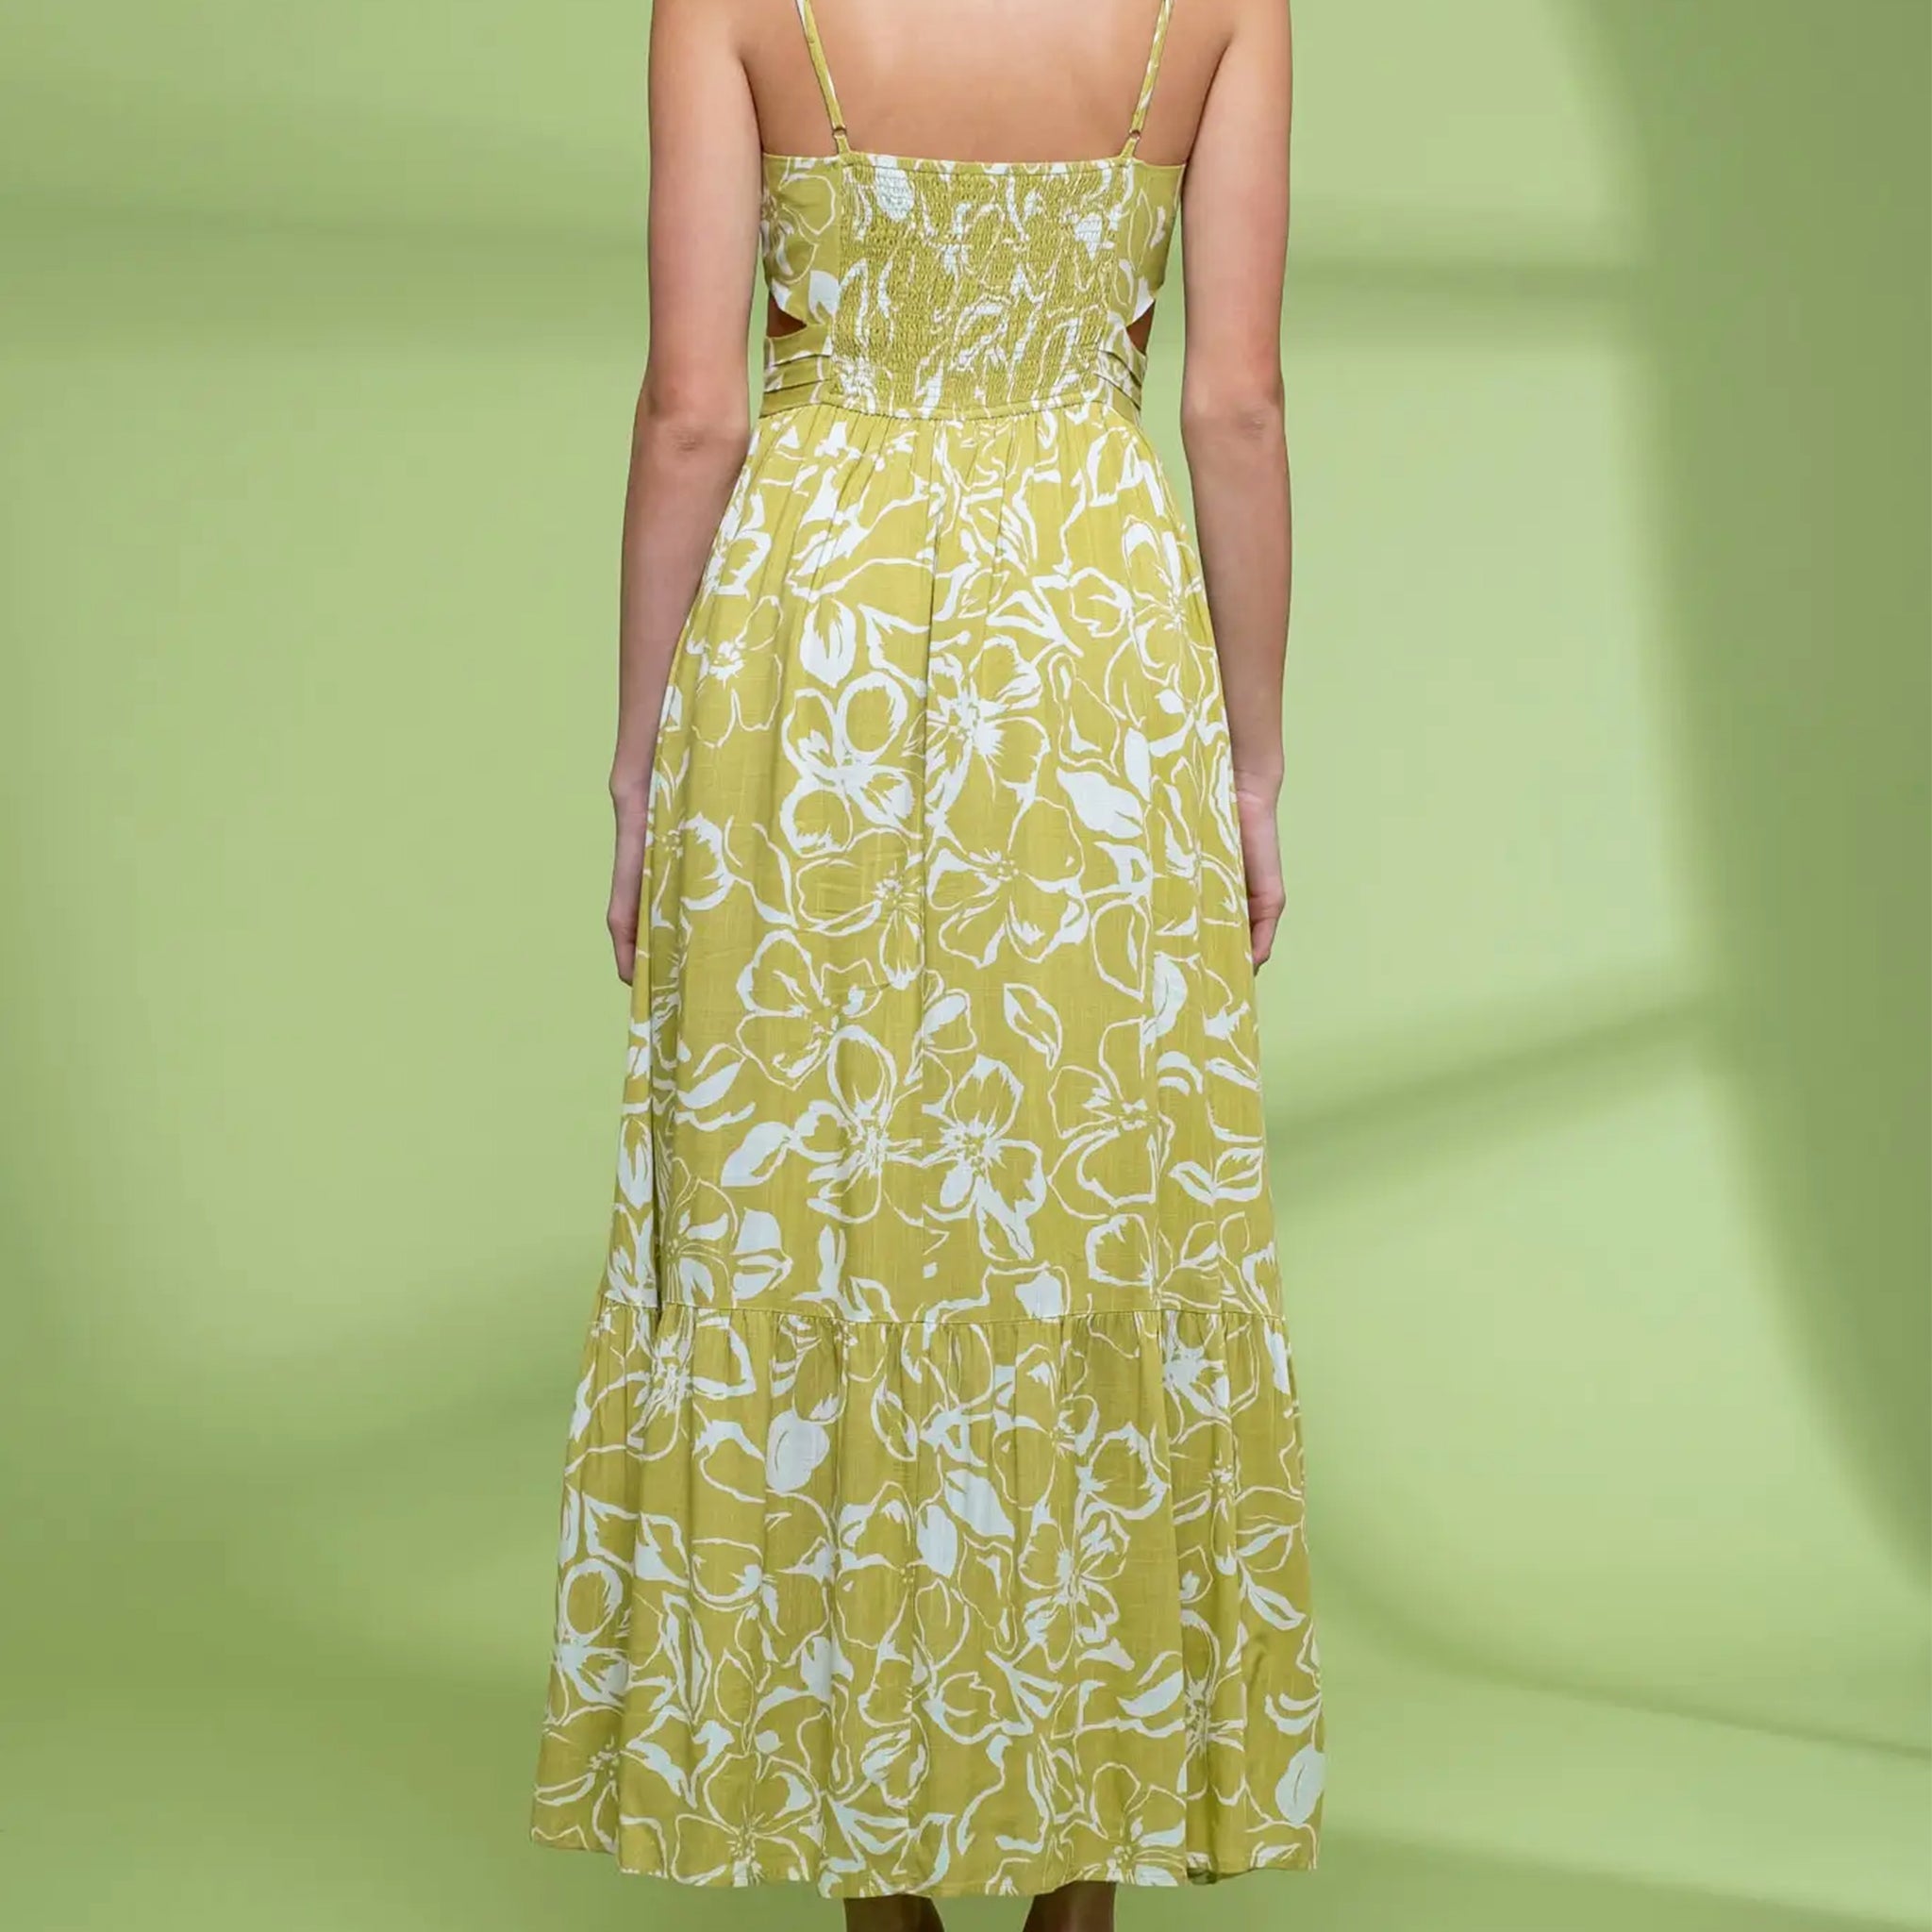 A lime green and white spaghetti strapped midi dress with a floral print.